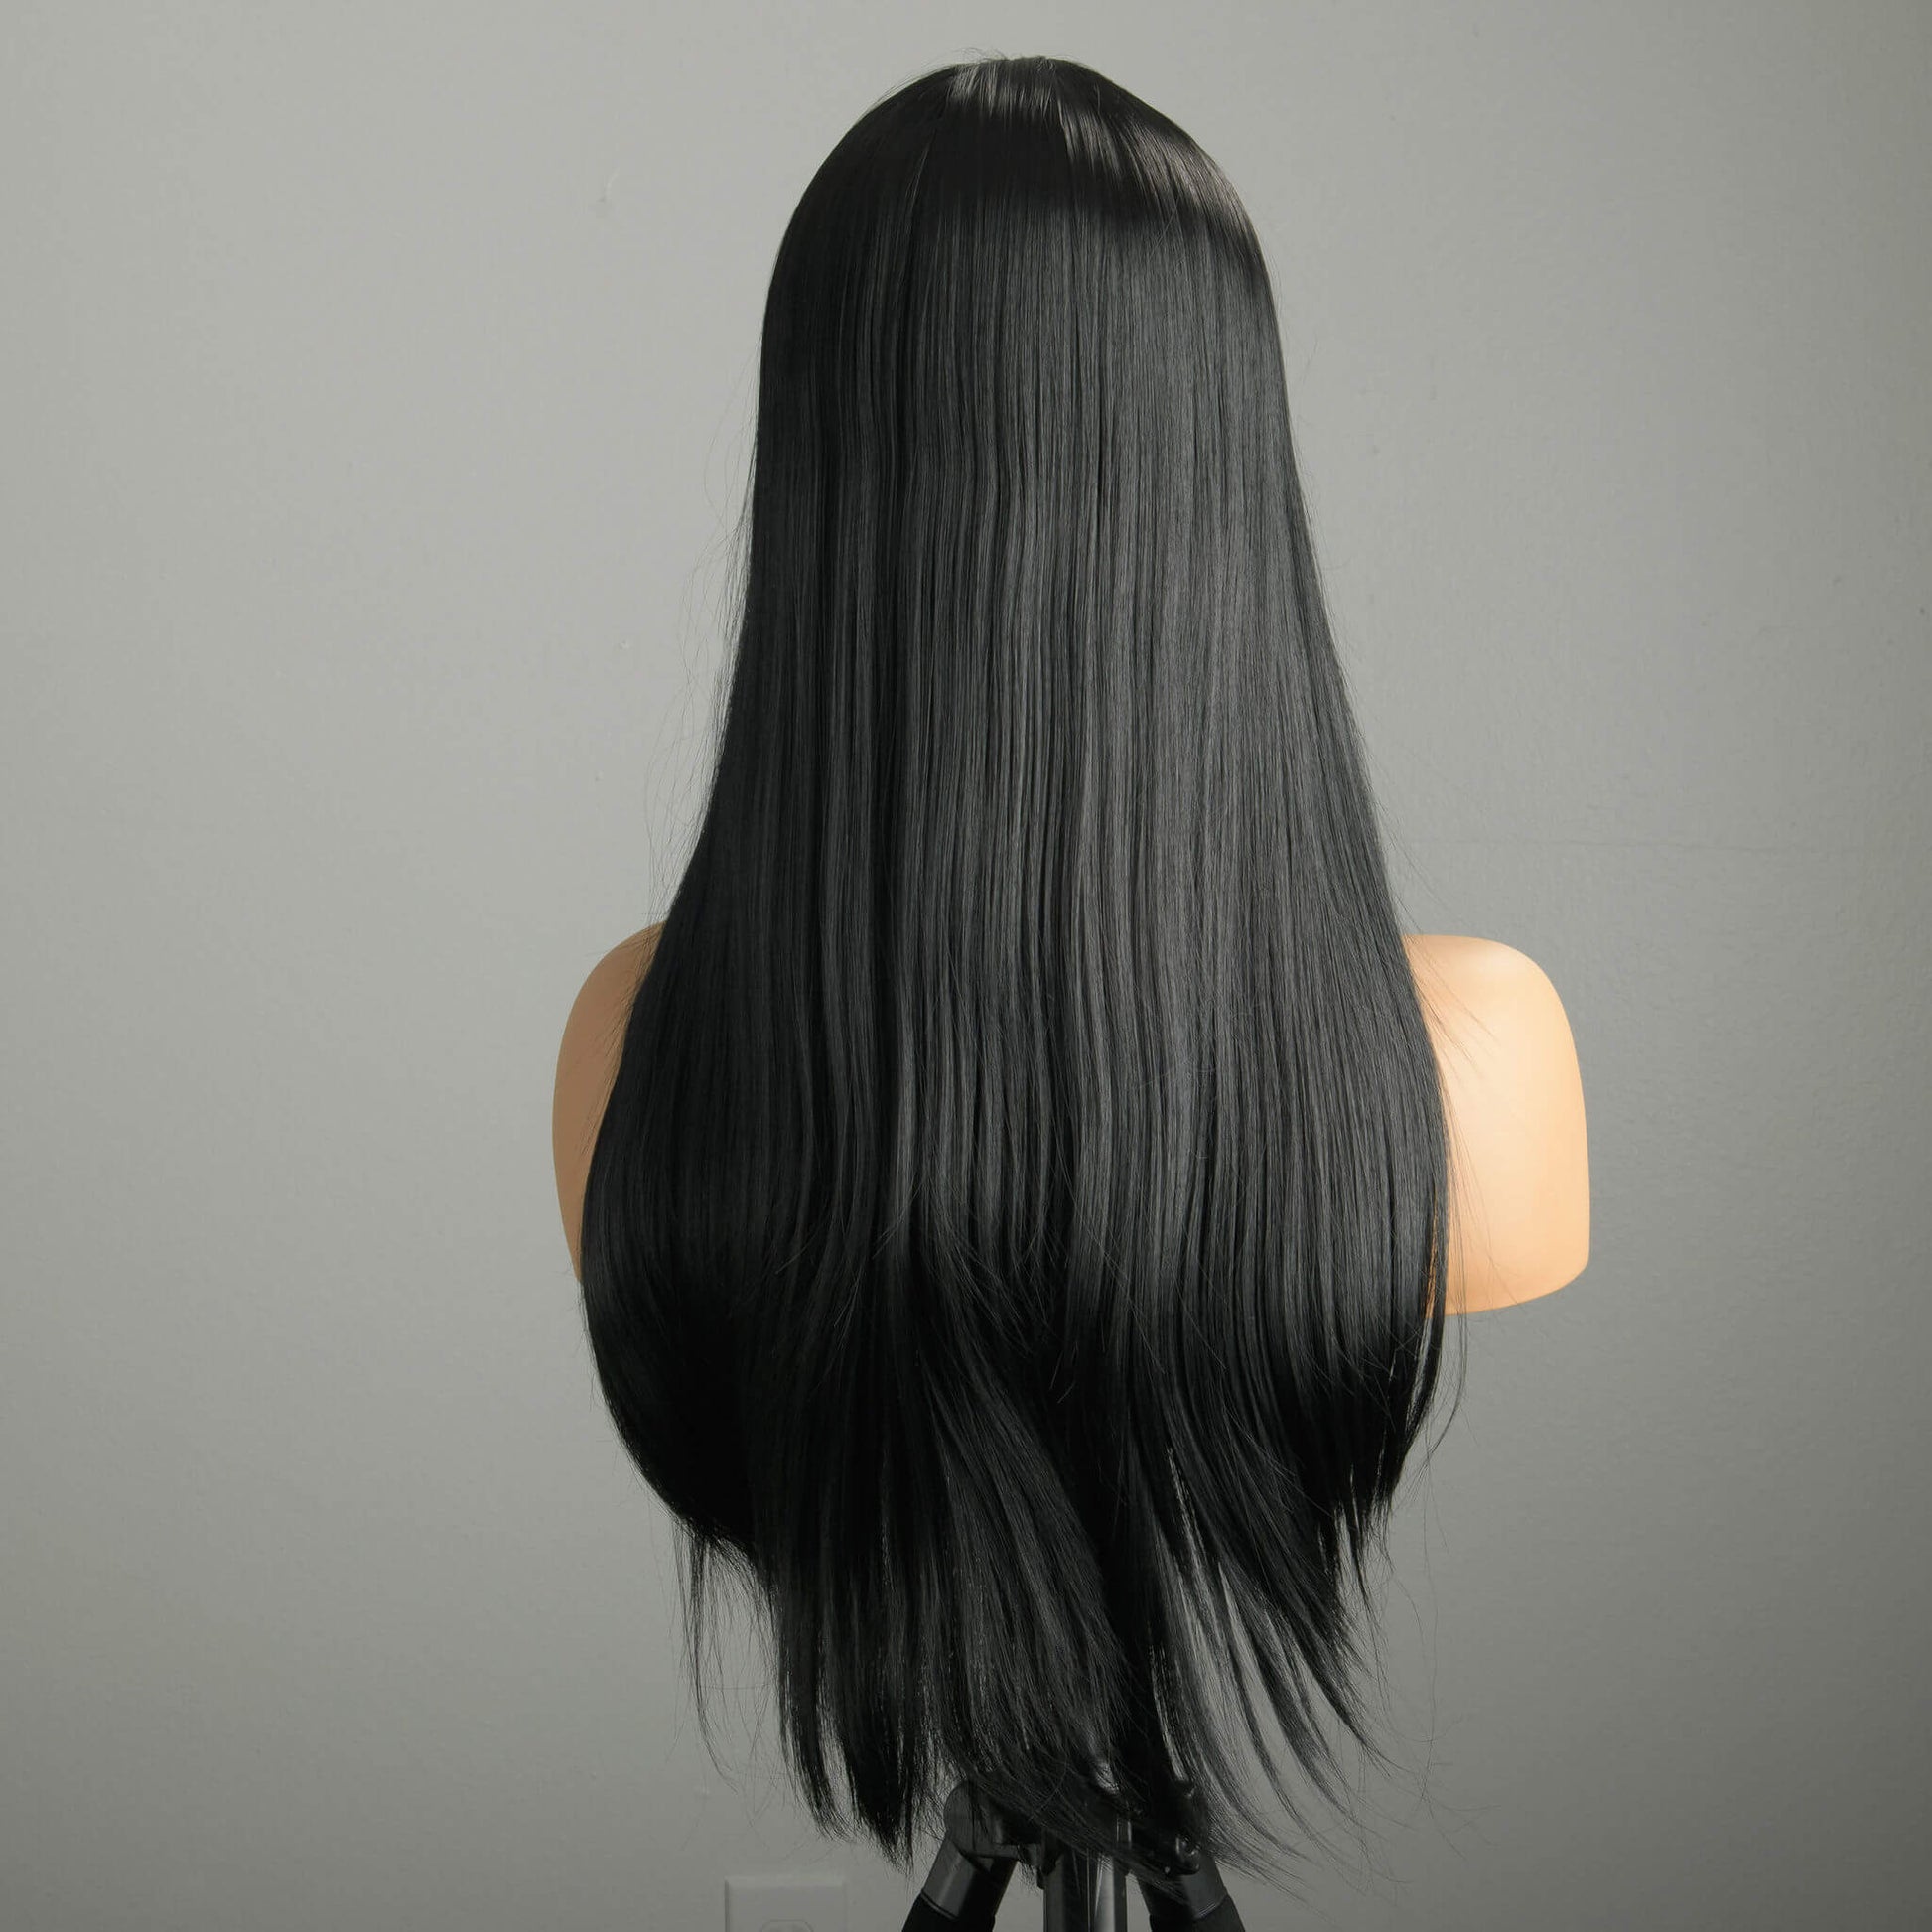 "Dark Star" | Synthetic Wig with Bangs | Long Straight Black Wig